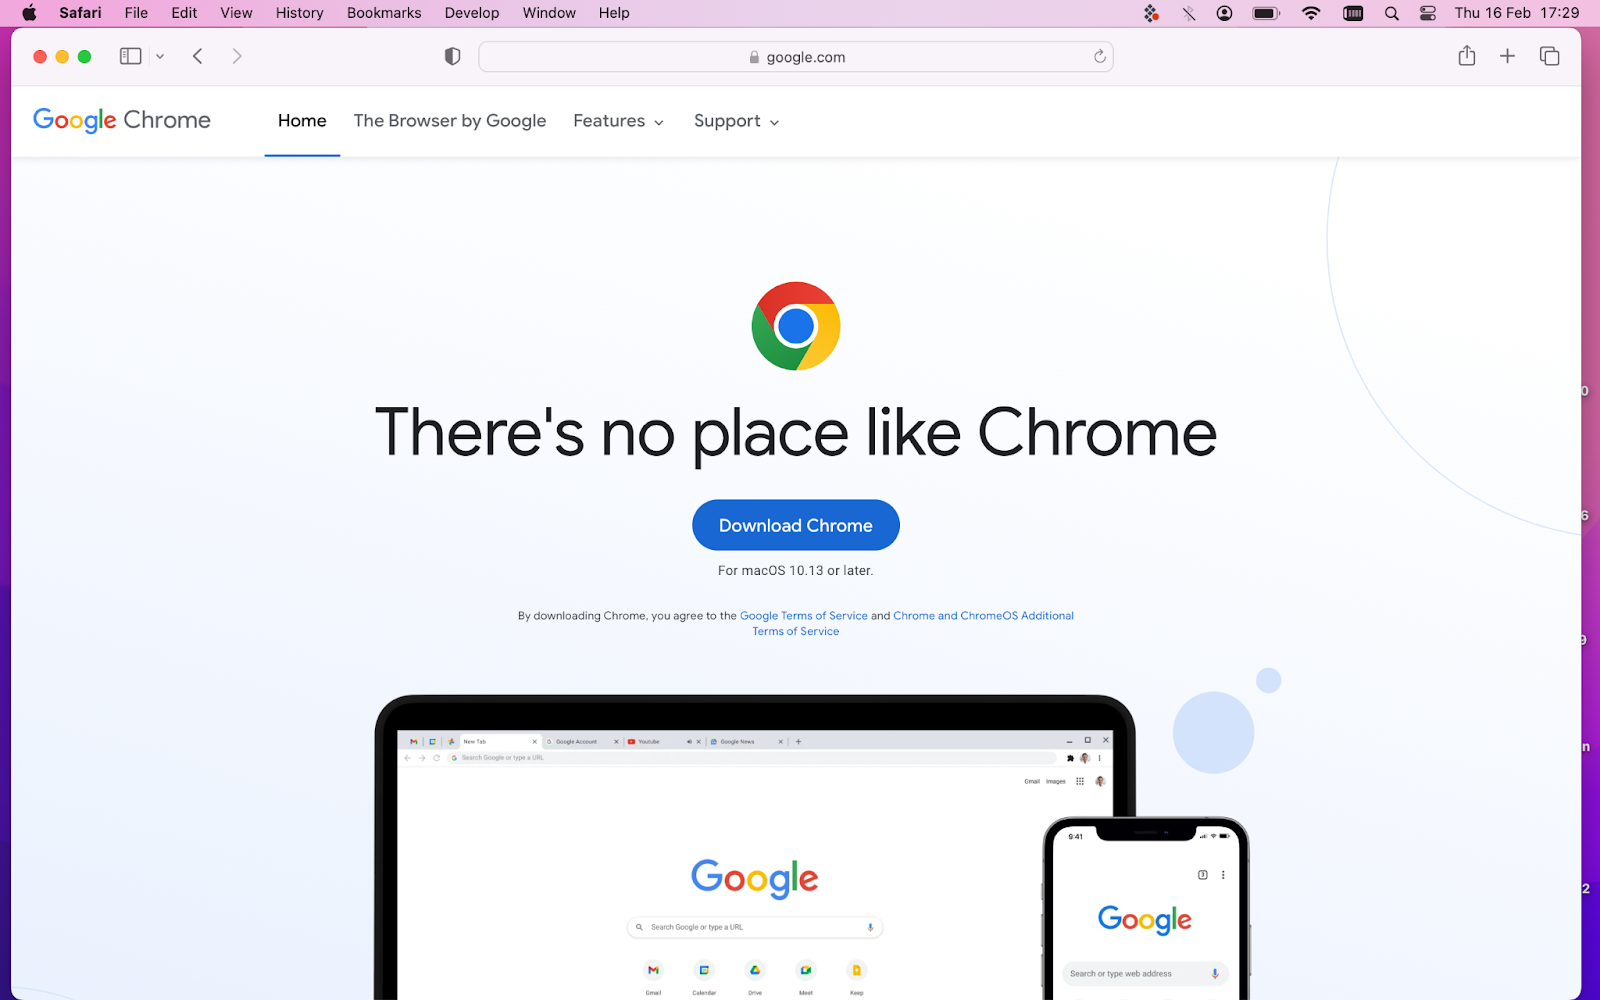 google chrome download for mac 10.4.11